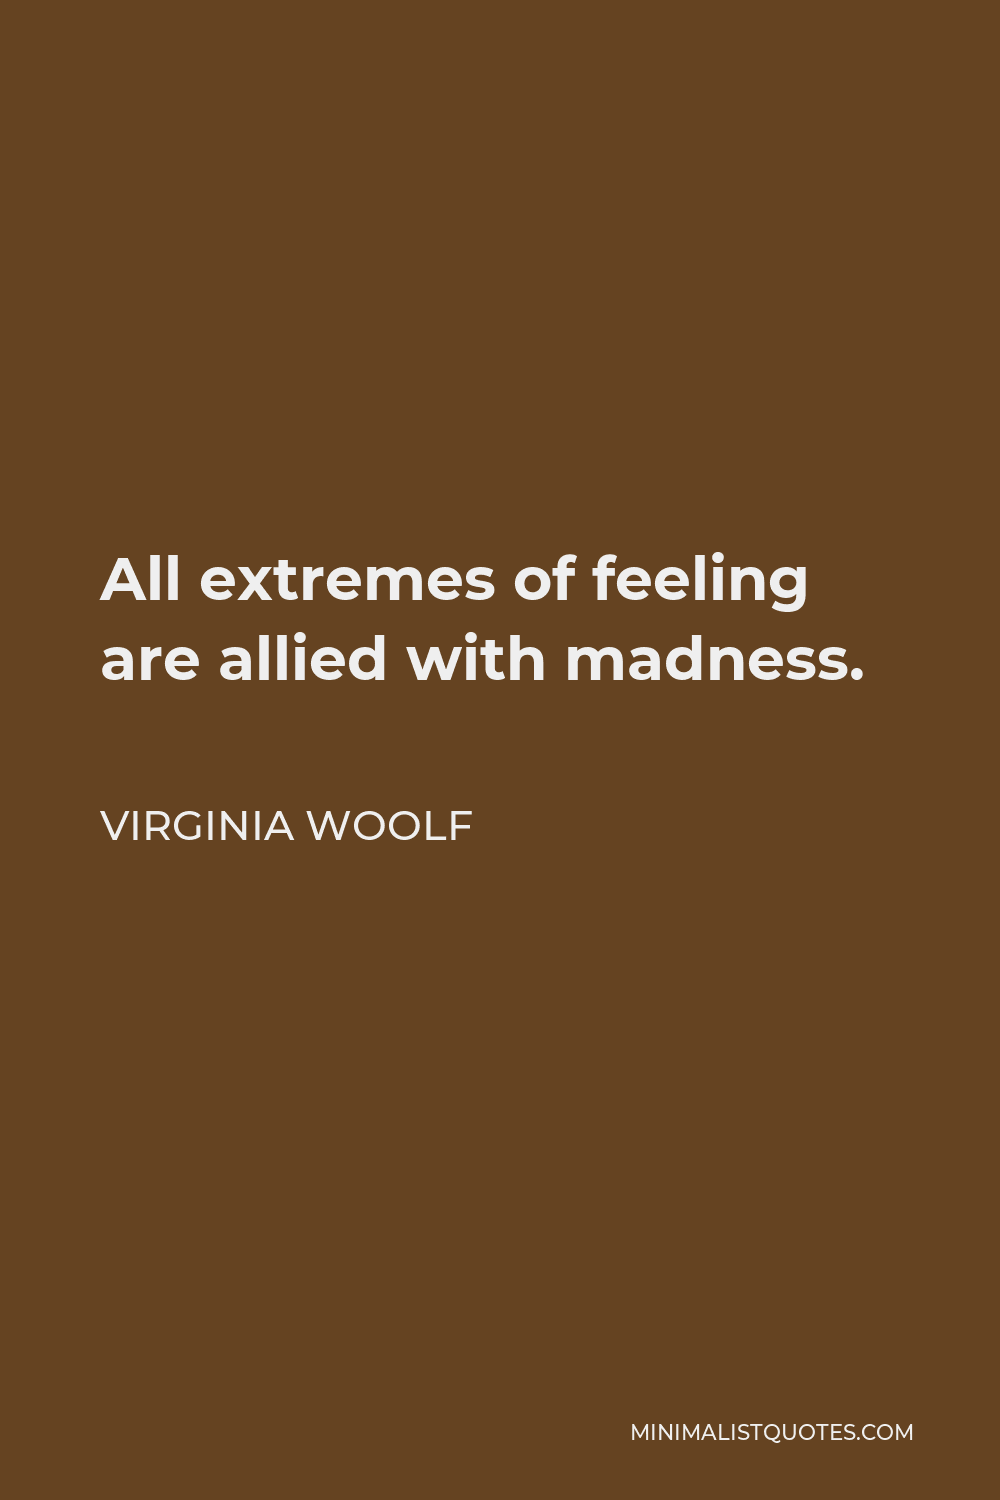 Virginia Woolf Quote - All extremes of feeling are allied with madness.